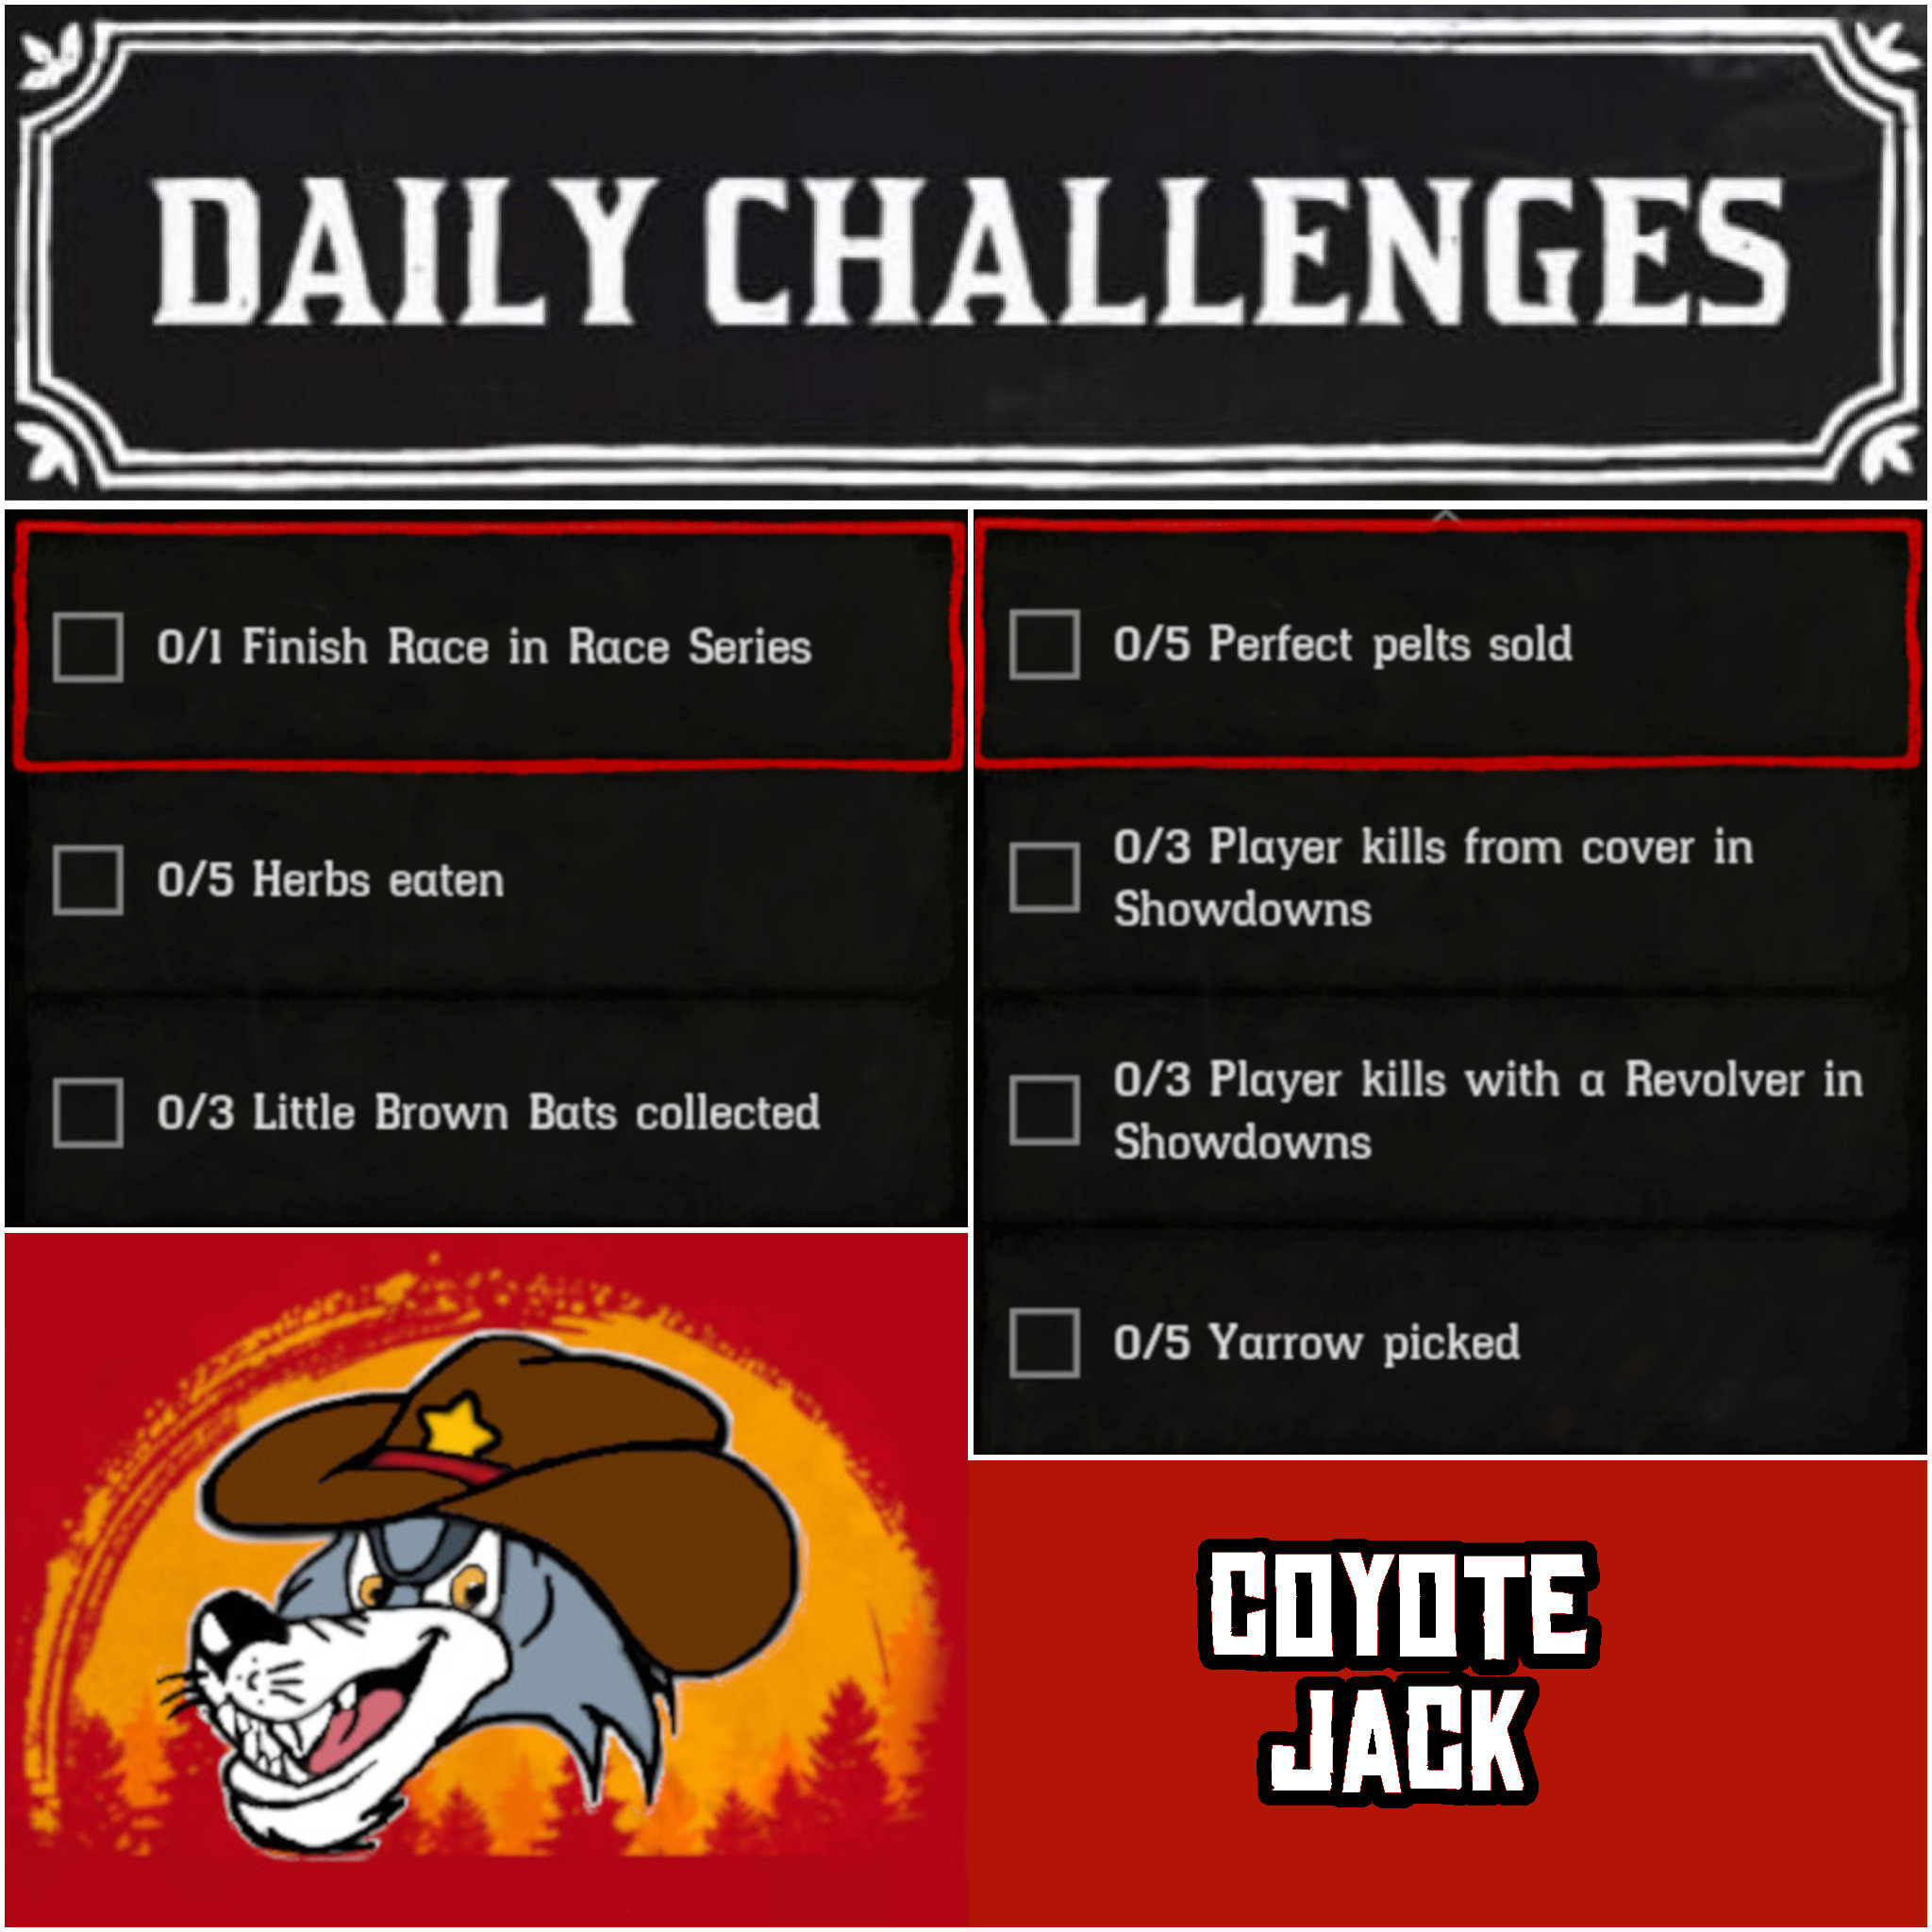 You are currently viewing Wednesday 02 September Daily challenges